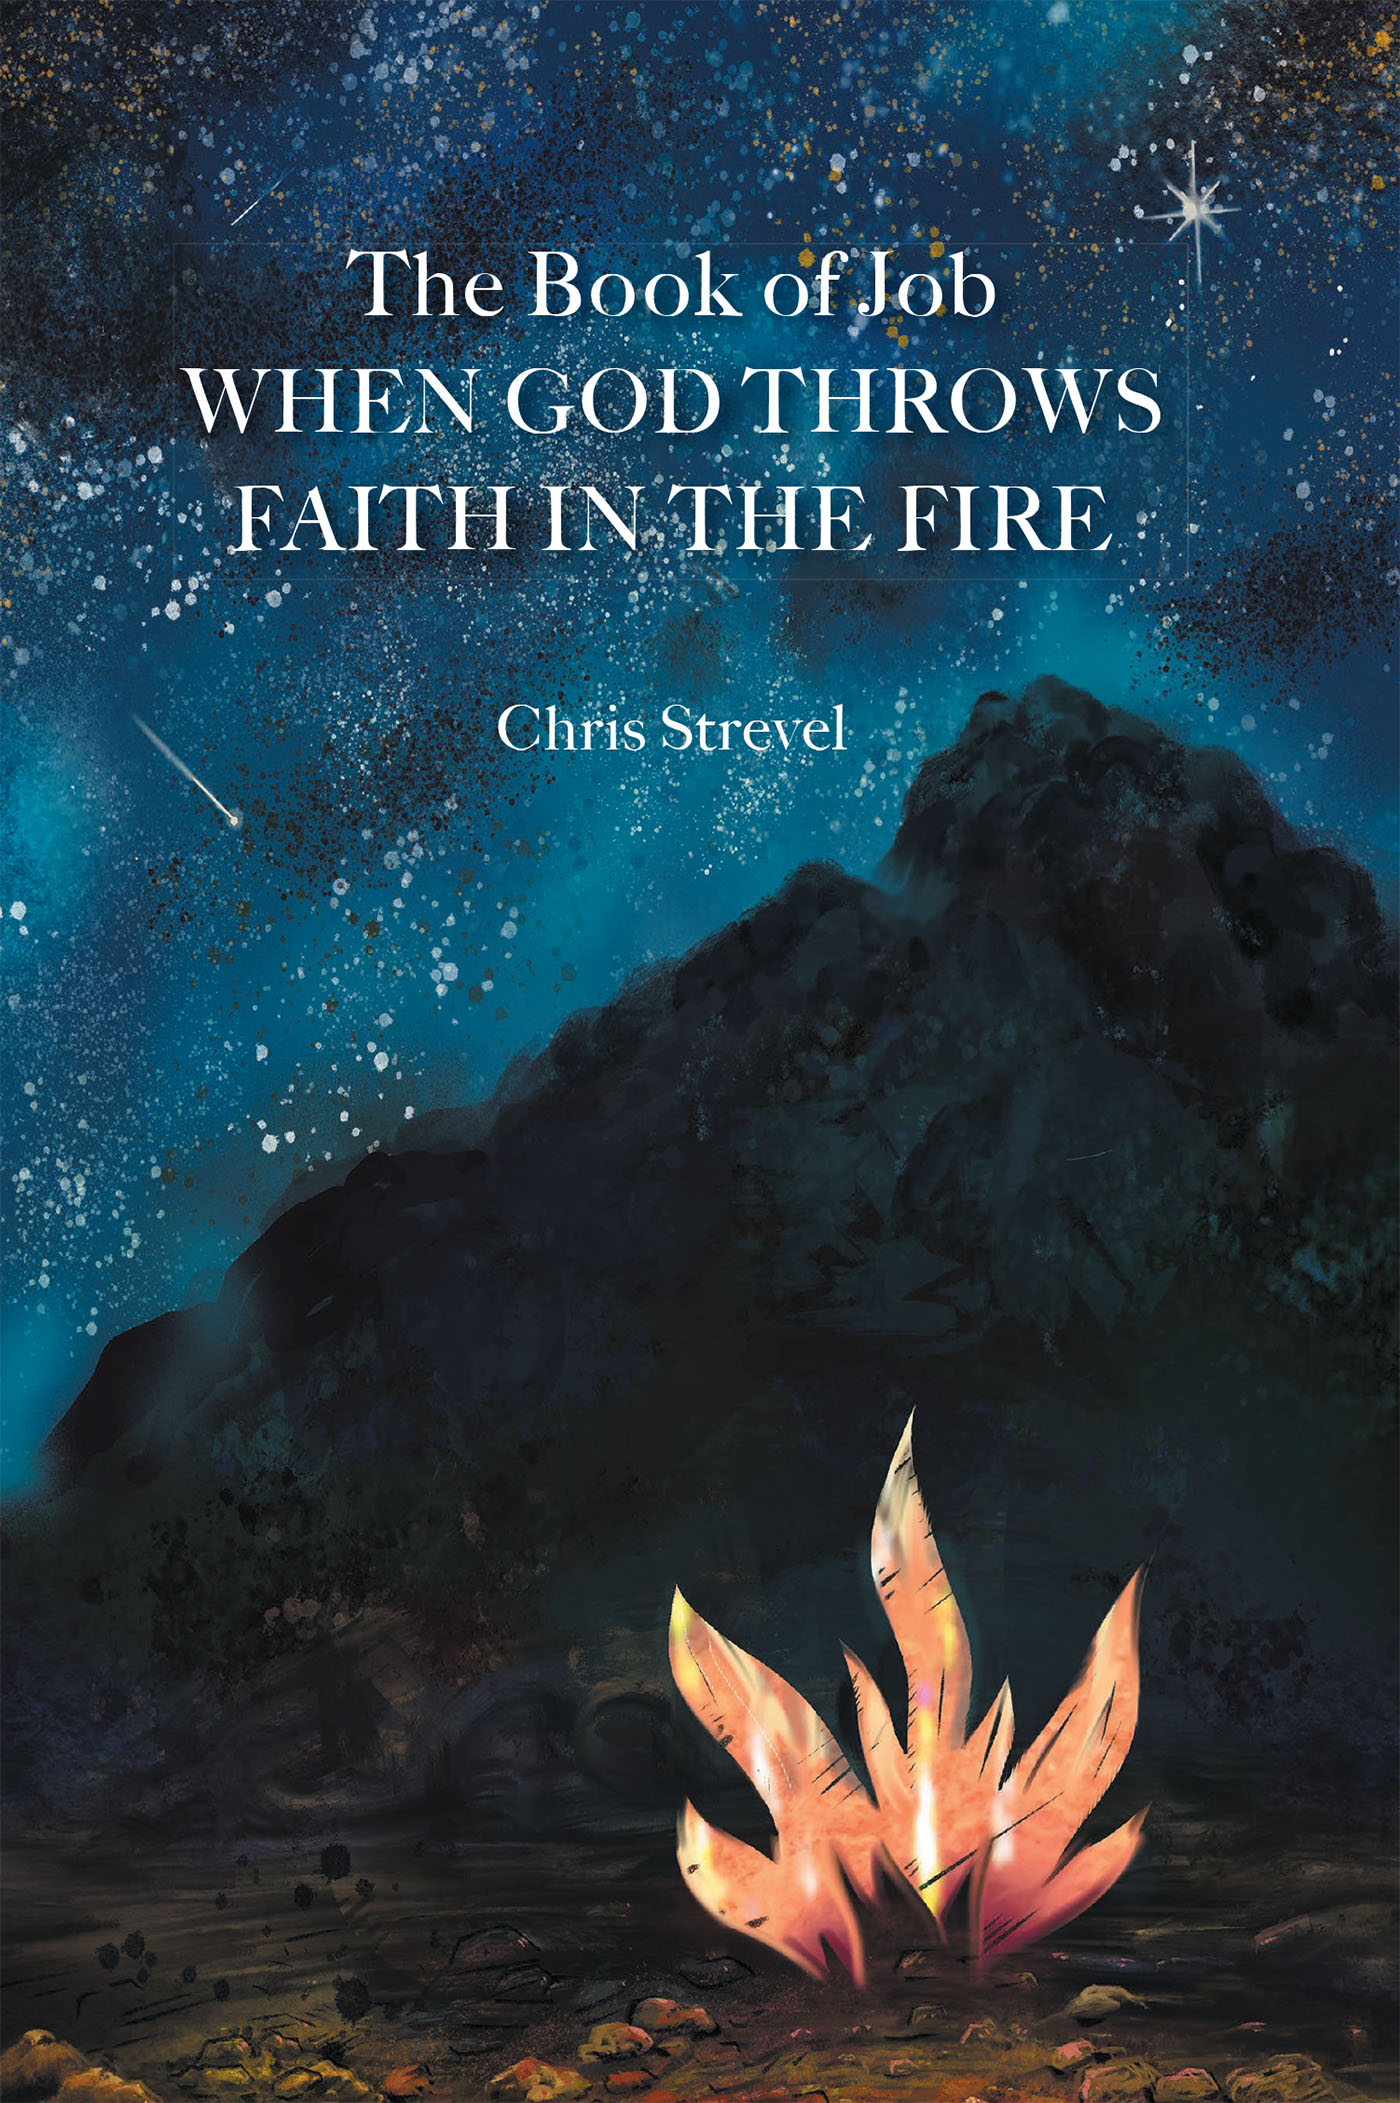 Author Chris Strevel’s New Book, "The Book of Job When God Throws Faith in the Fire," is a Unique Look at How God Tests Even His Most Faithful Children